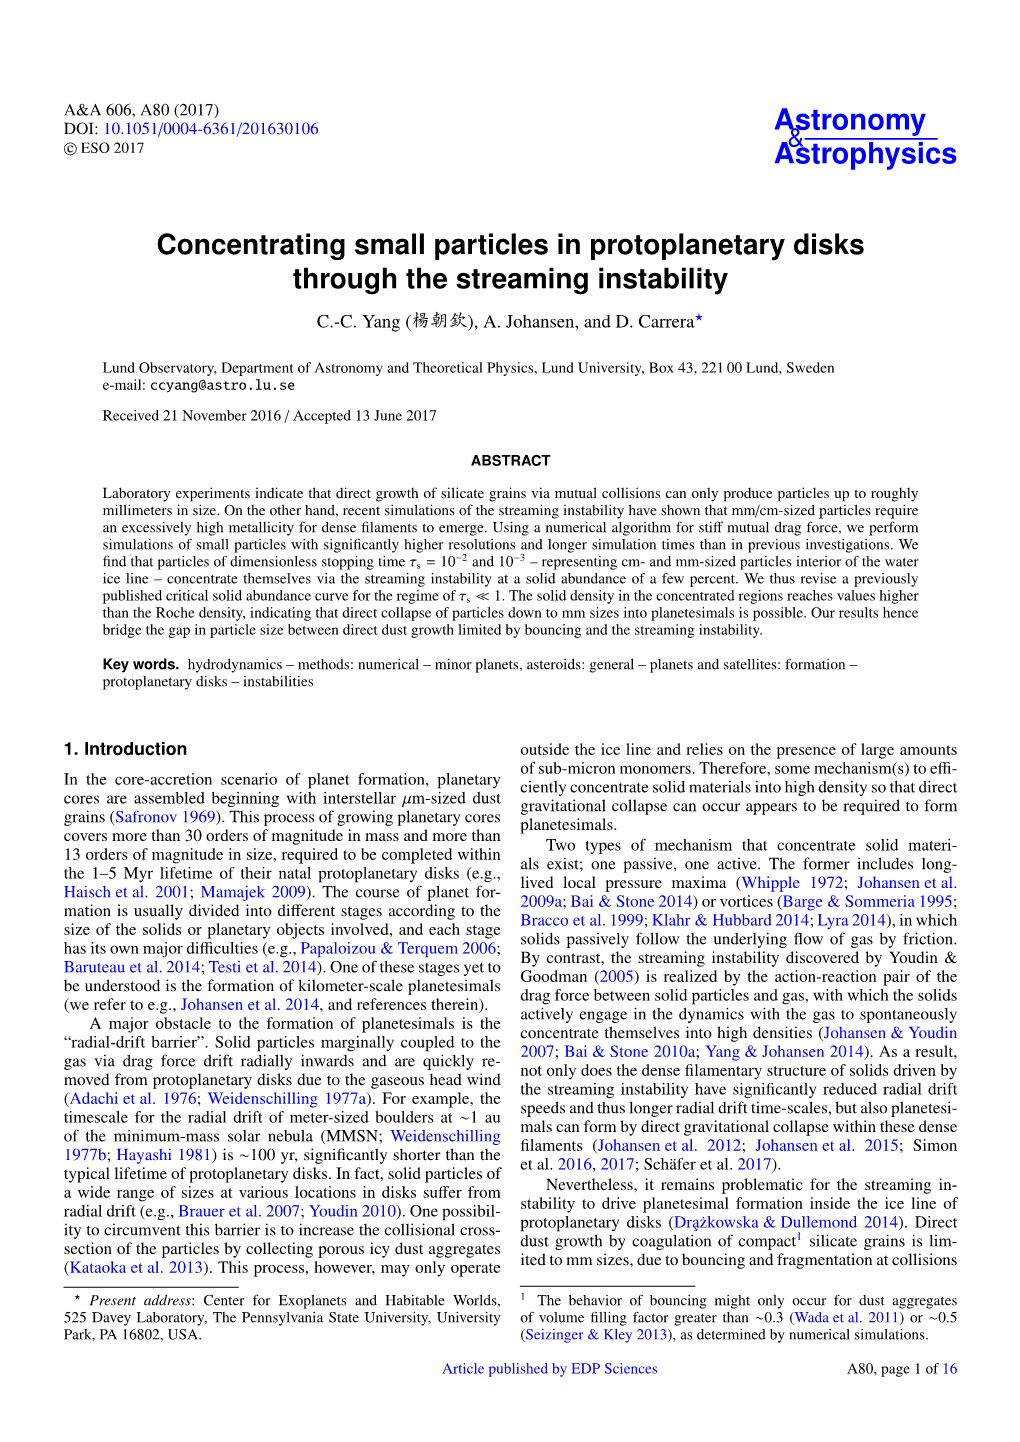 Concentrating Small Particles in Protoplanetary Disks Through the Streaming Instability C.-C